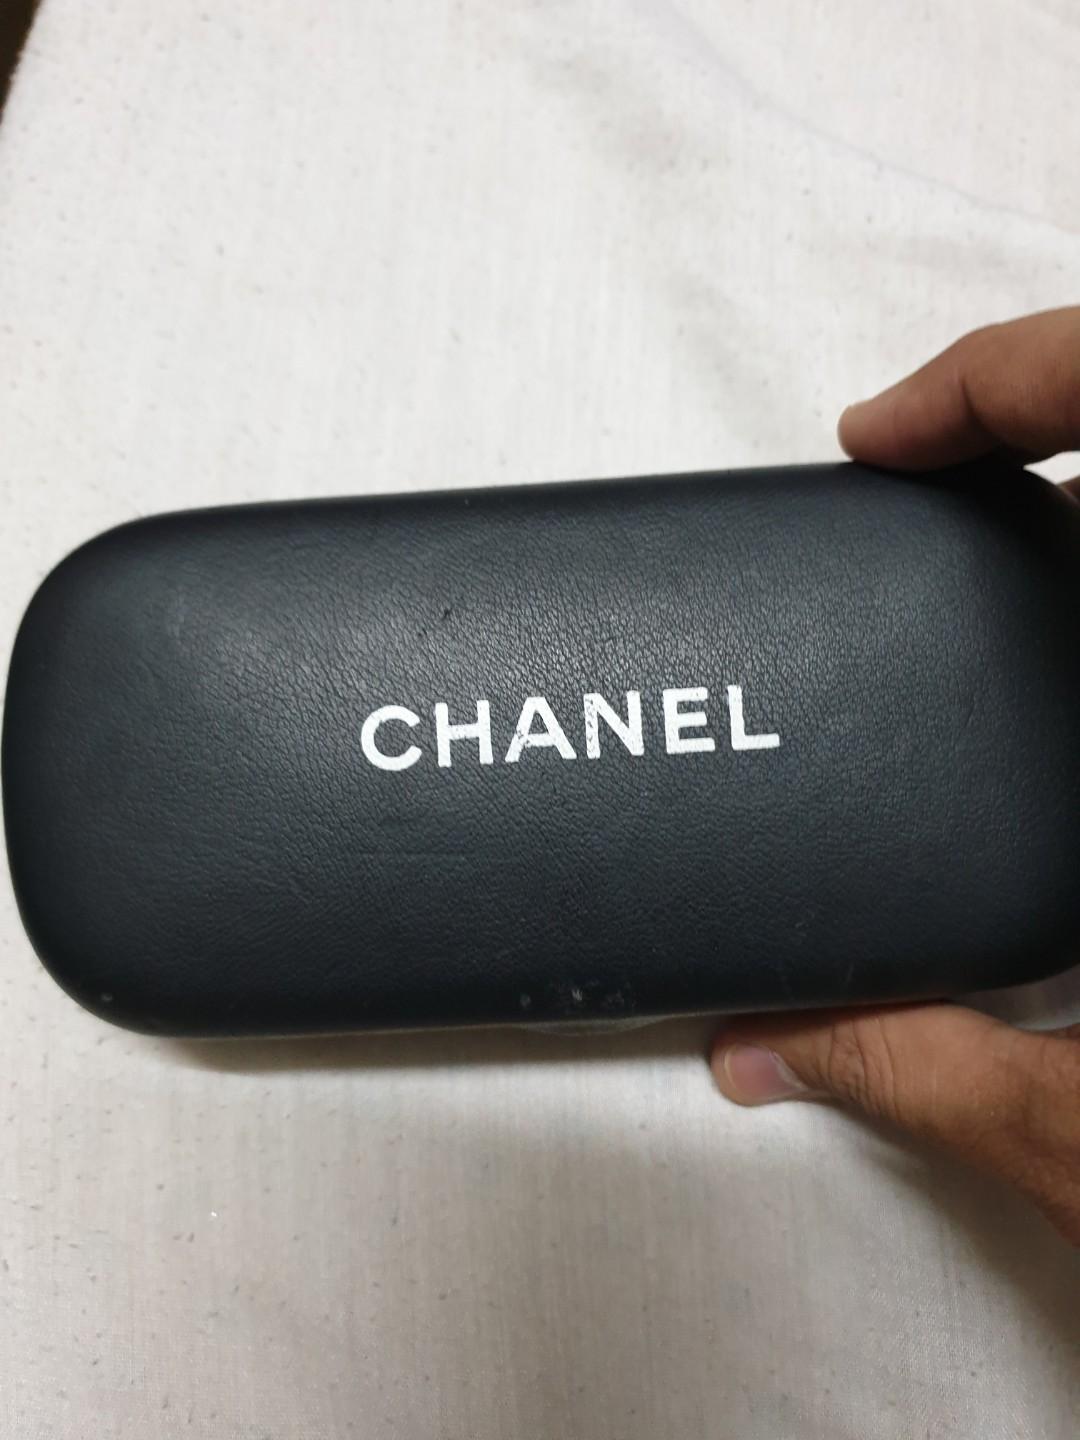 Authentic Chanel Tortoise shell Sunglasses from 15k photo view 3